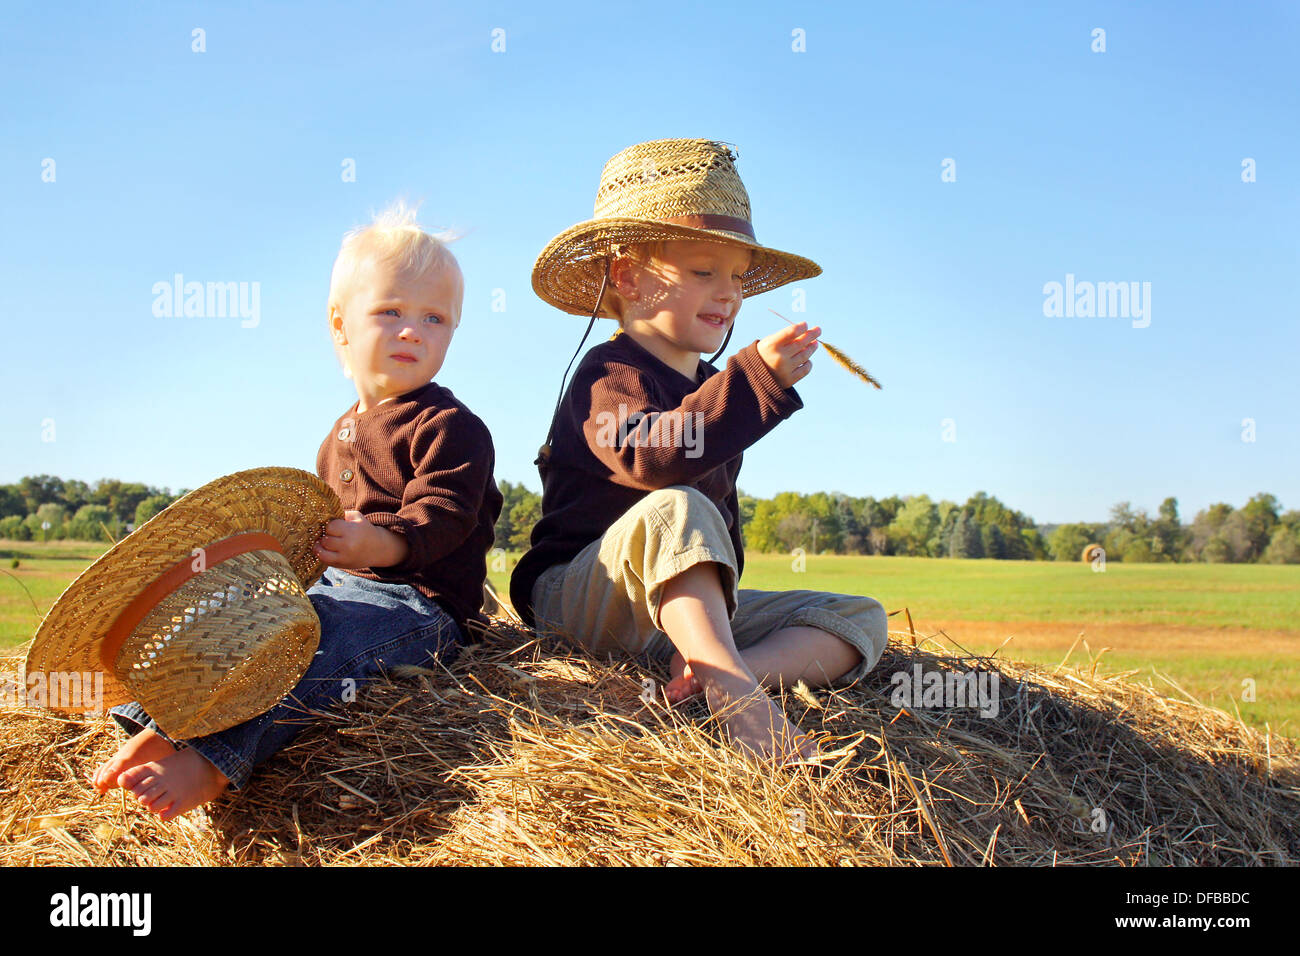 Two young kids, a little boy and his baby brother, are sitting on top of a hay bale wearing straw hats on a sunny autumn day. Stock Photo